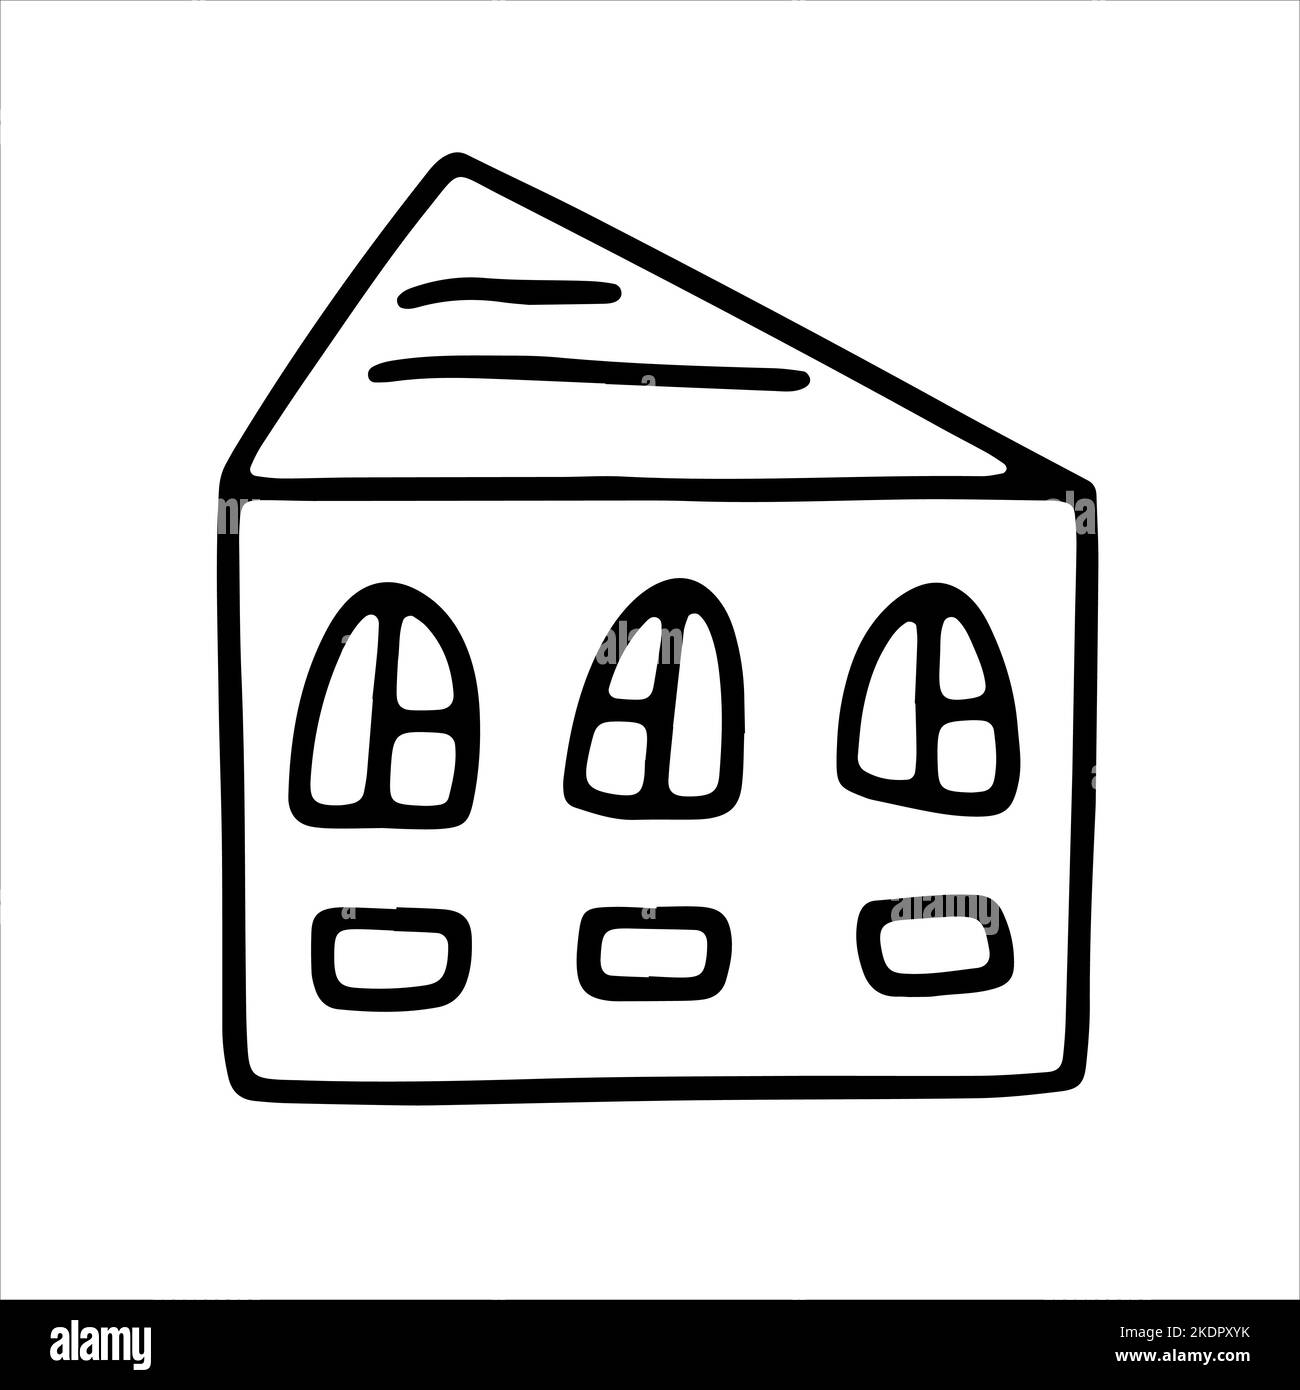 Doodle house. Sketch bw scribble style. Hand drawn build vector illustration Stock Vector